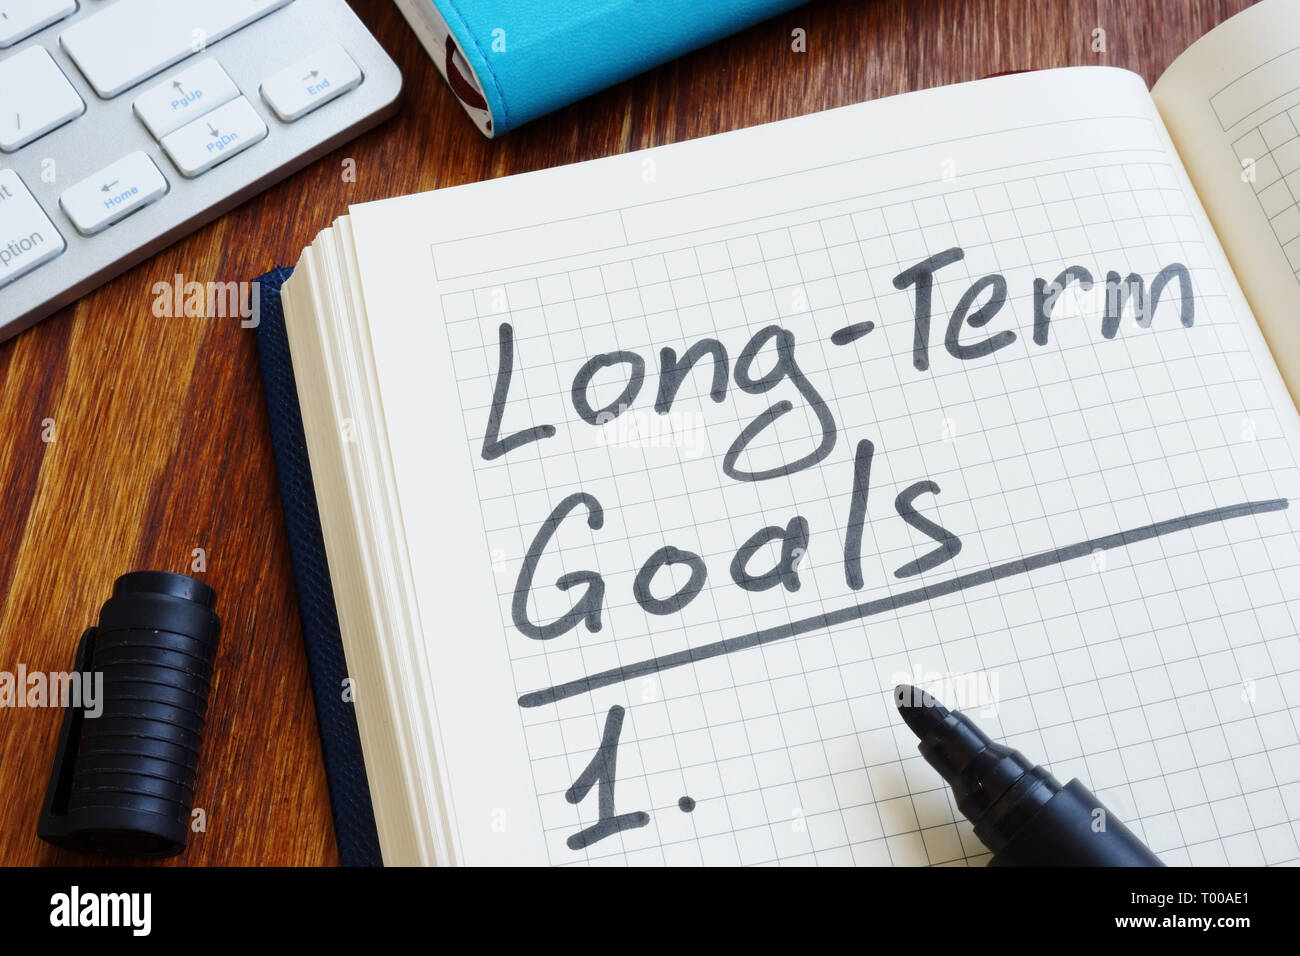 List of Long term goals in the note. Stock Photo